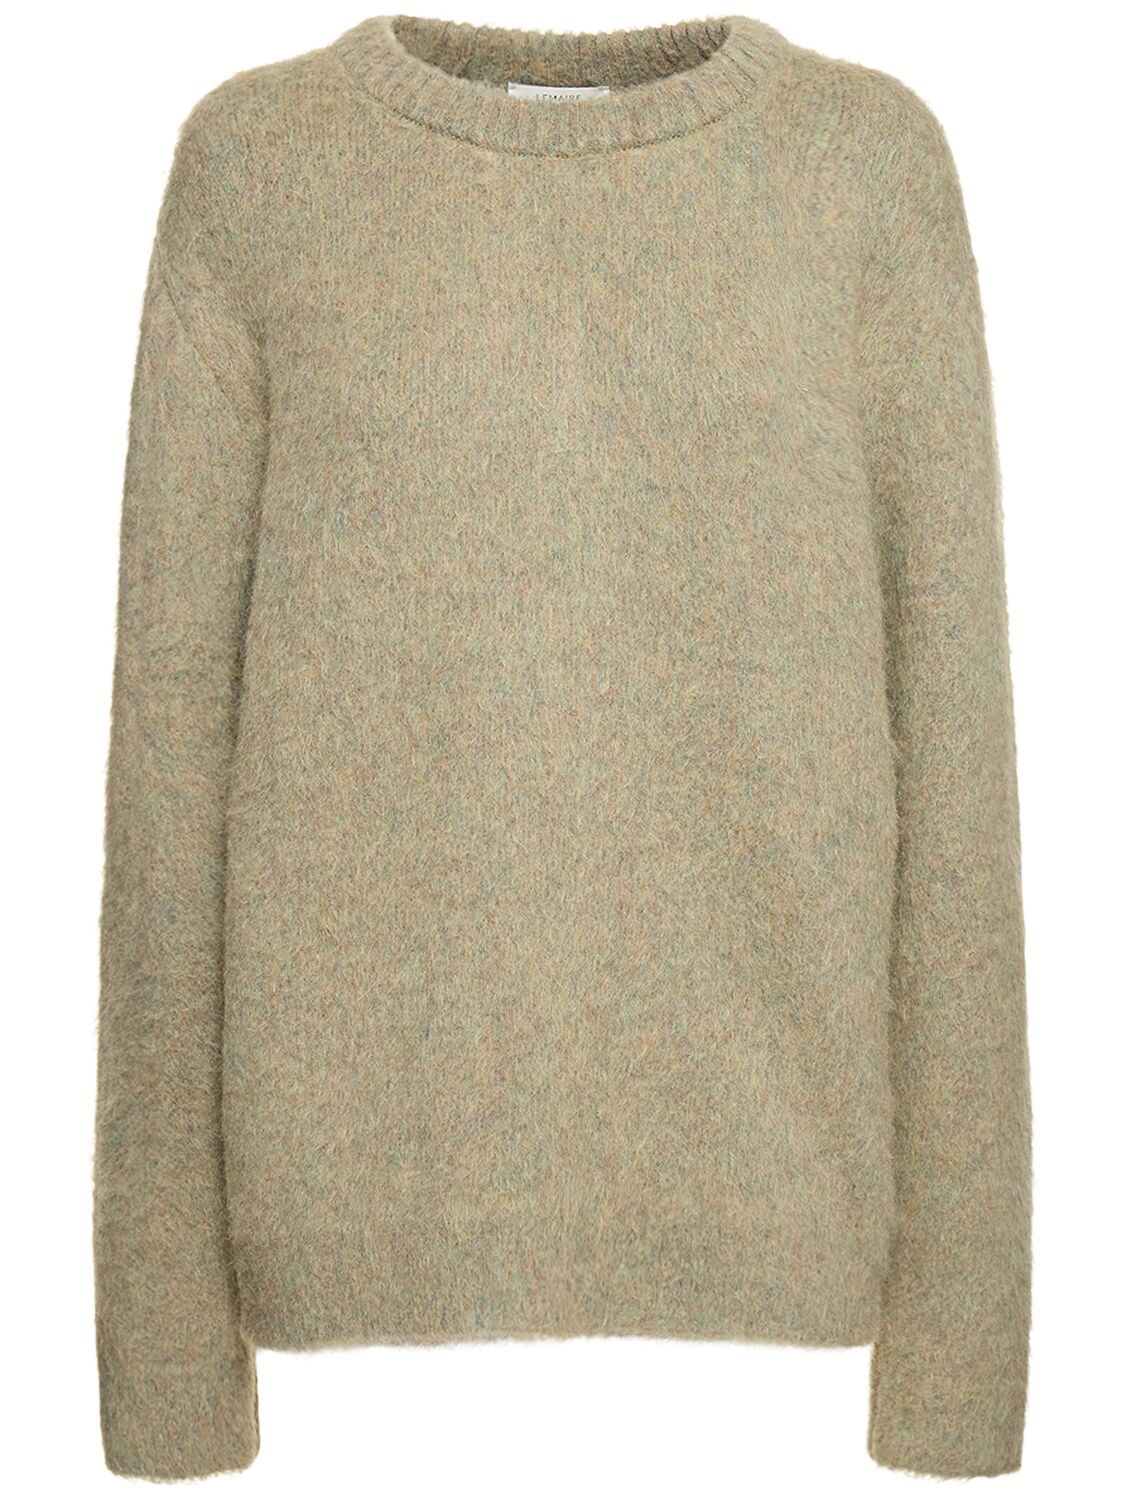 Image of Brushed Mohair Blend Sweater